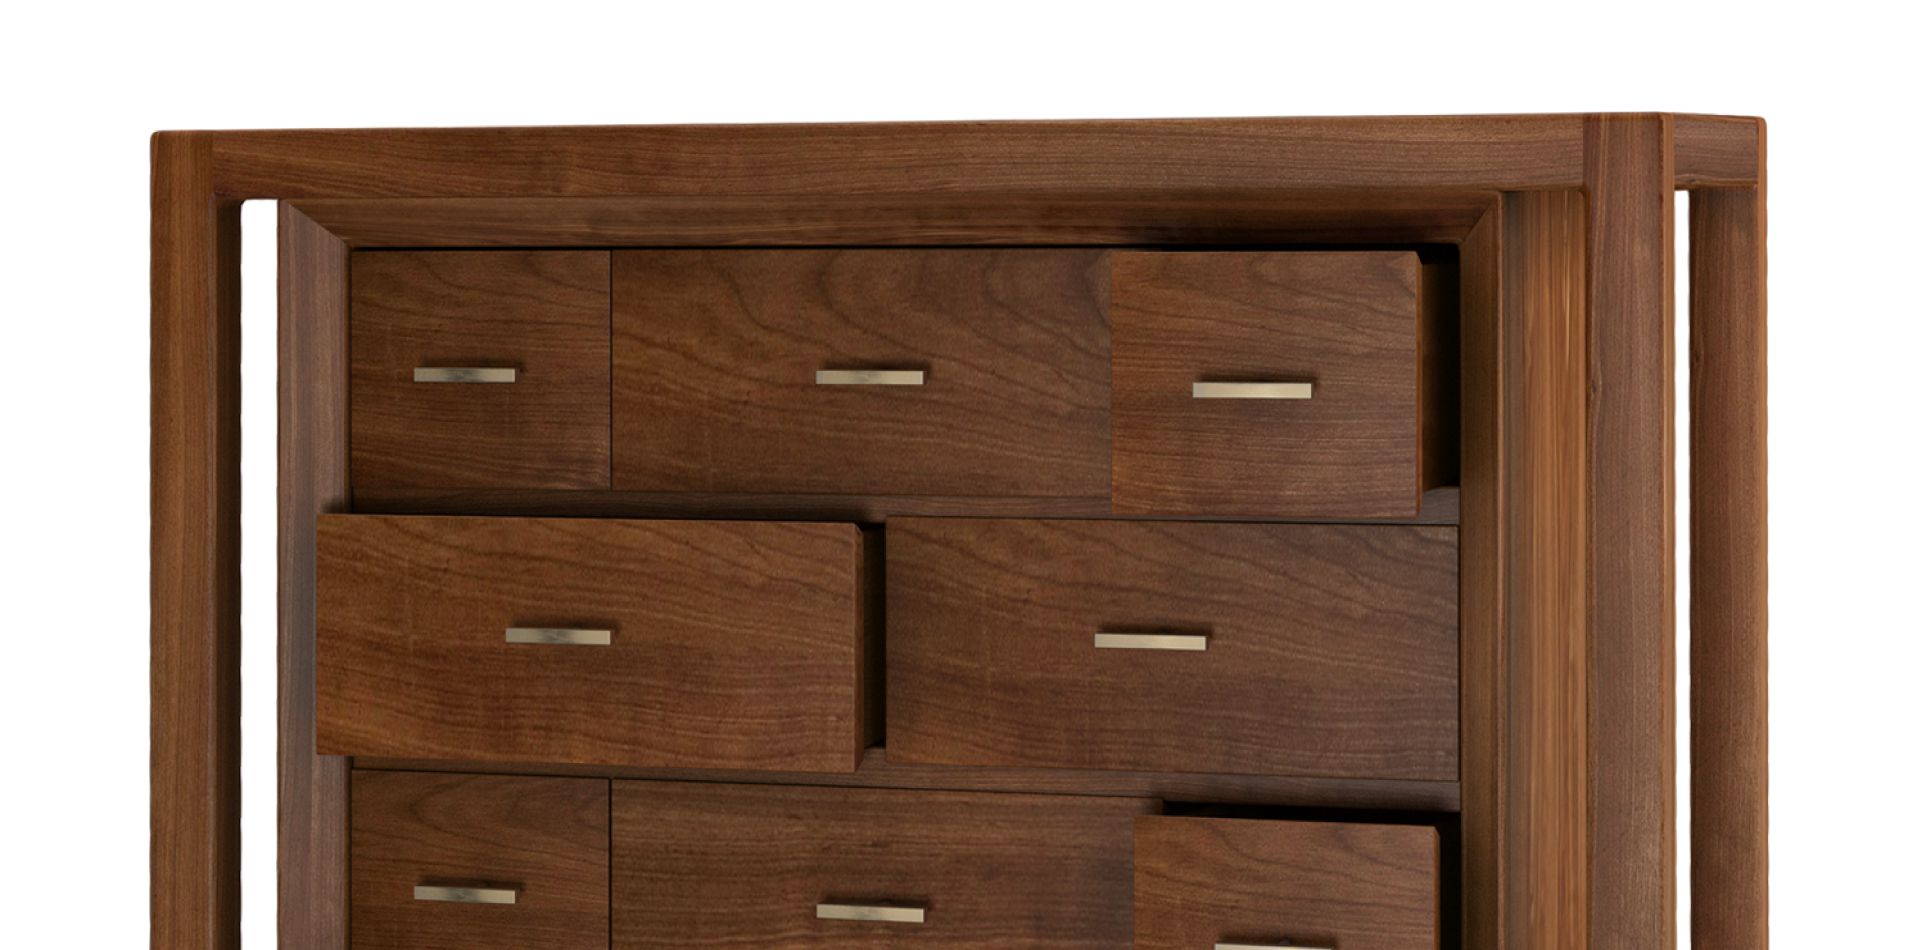 Caxton chest of drawers in noble wood